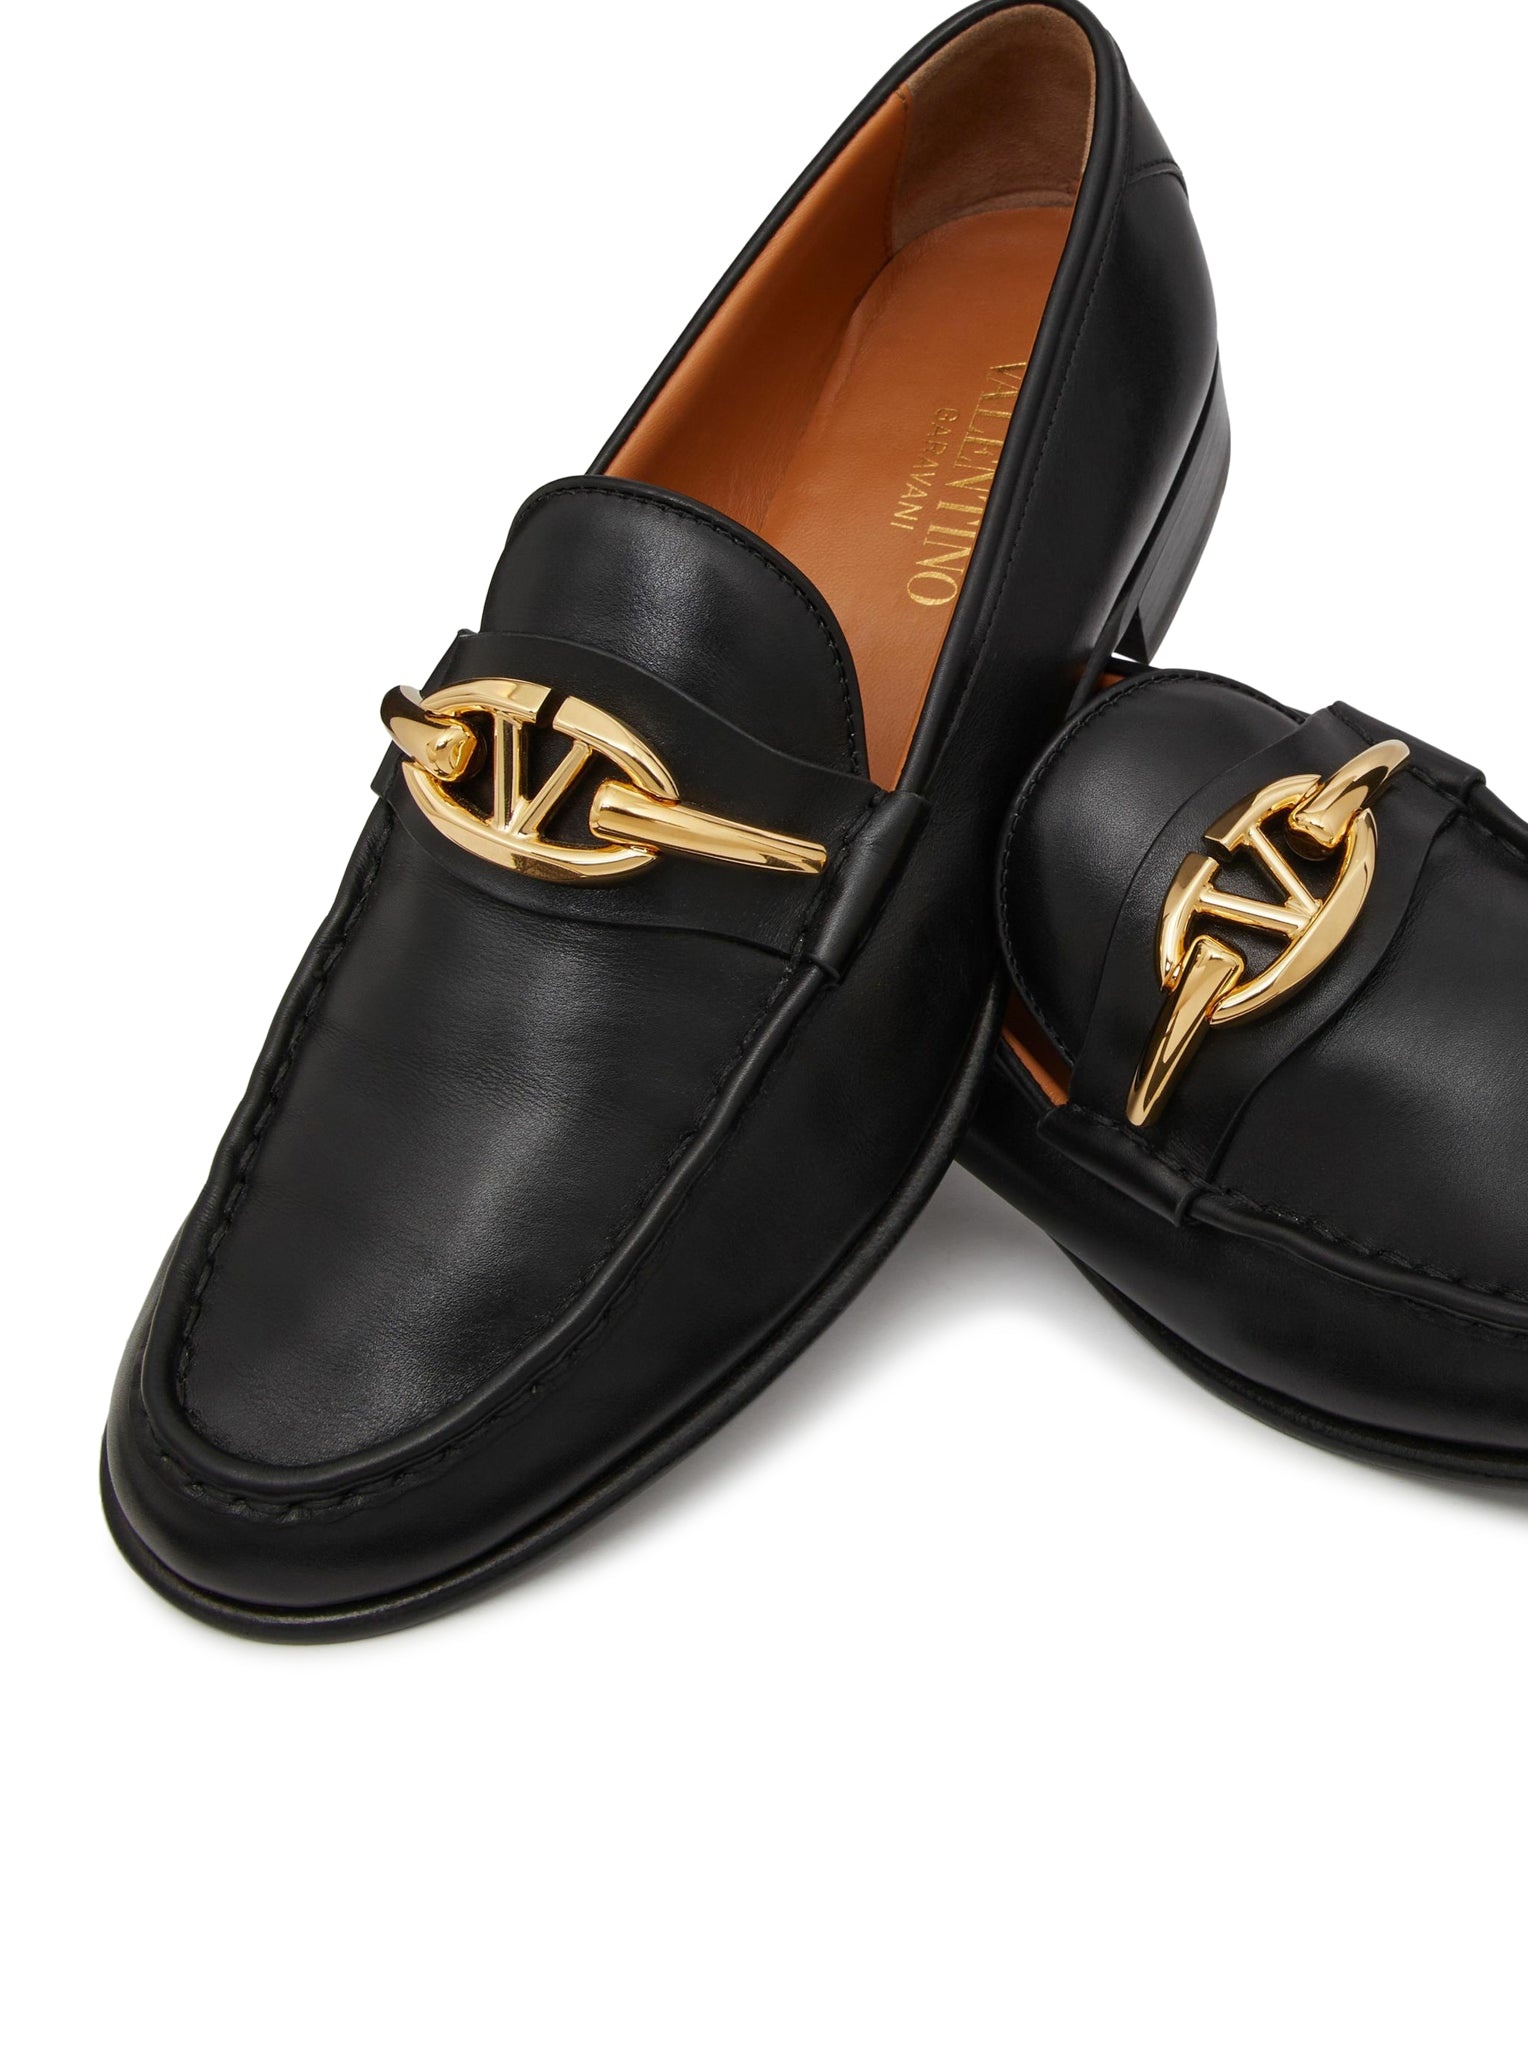 VLOGO THE BOLD EDITION LOAFERS IN CALFSKIN - 6